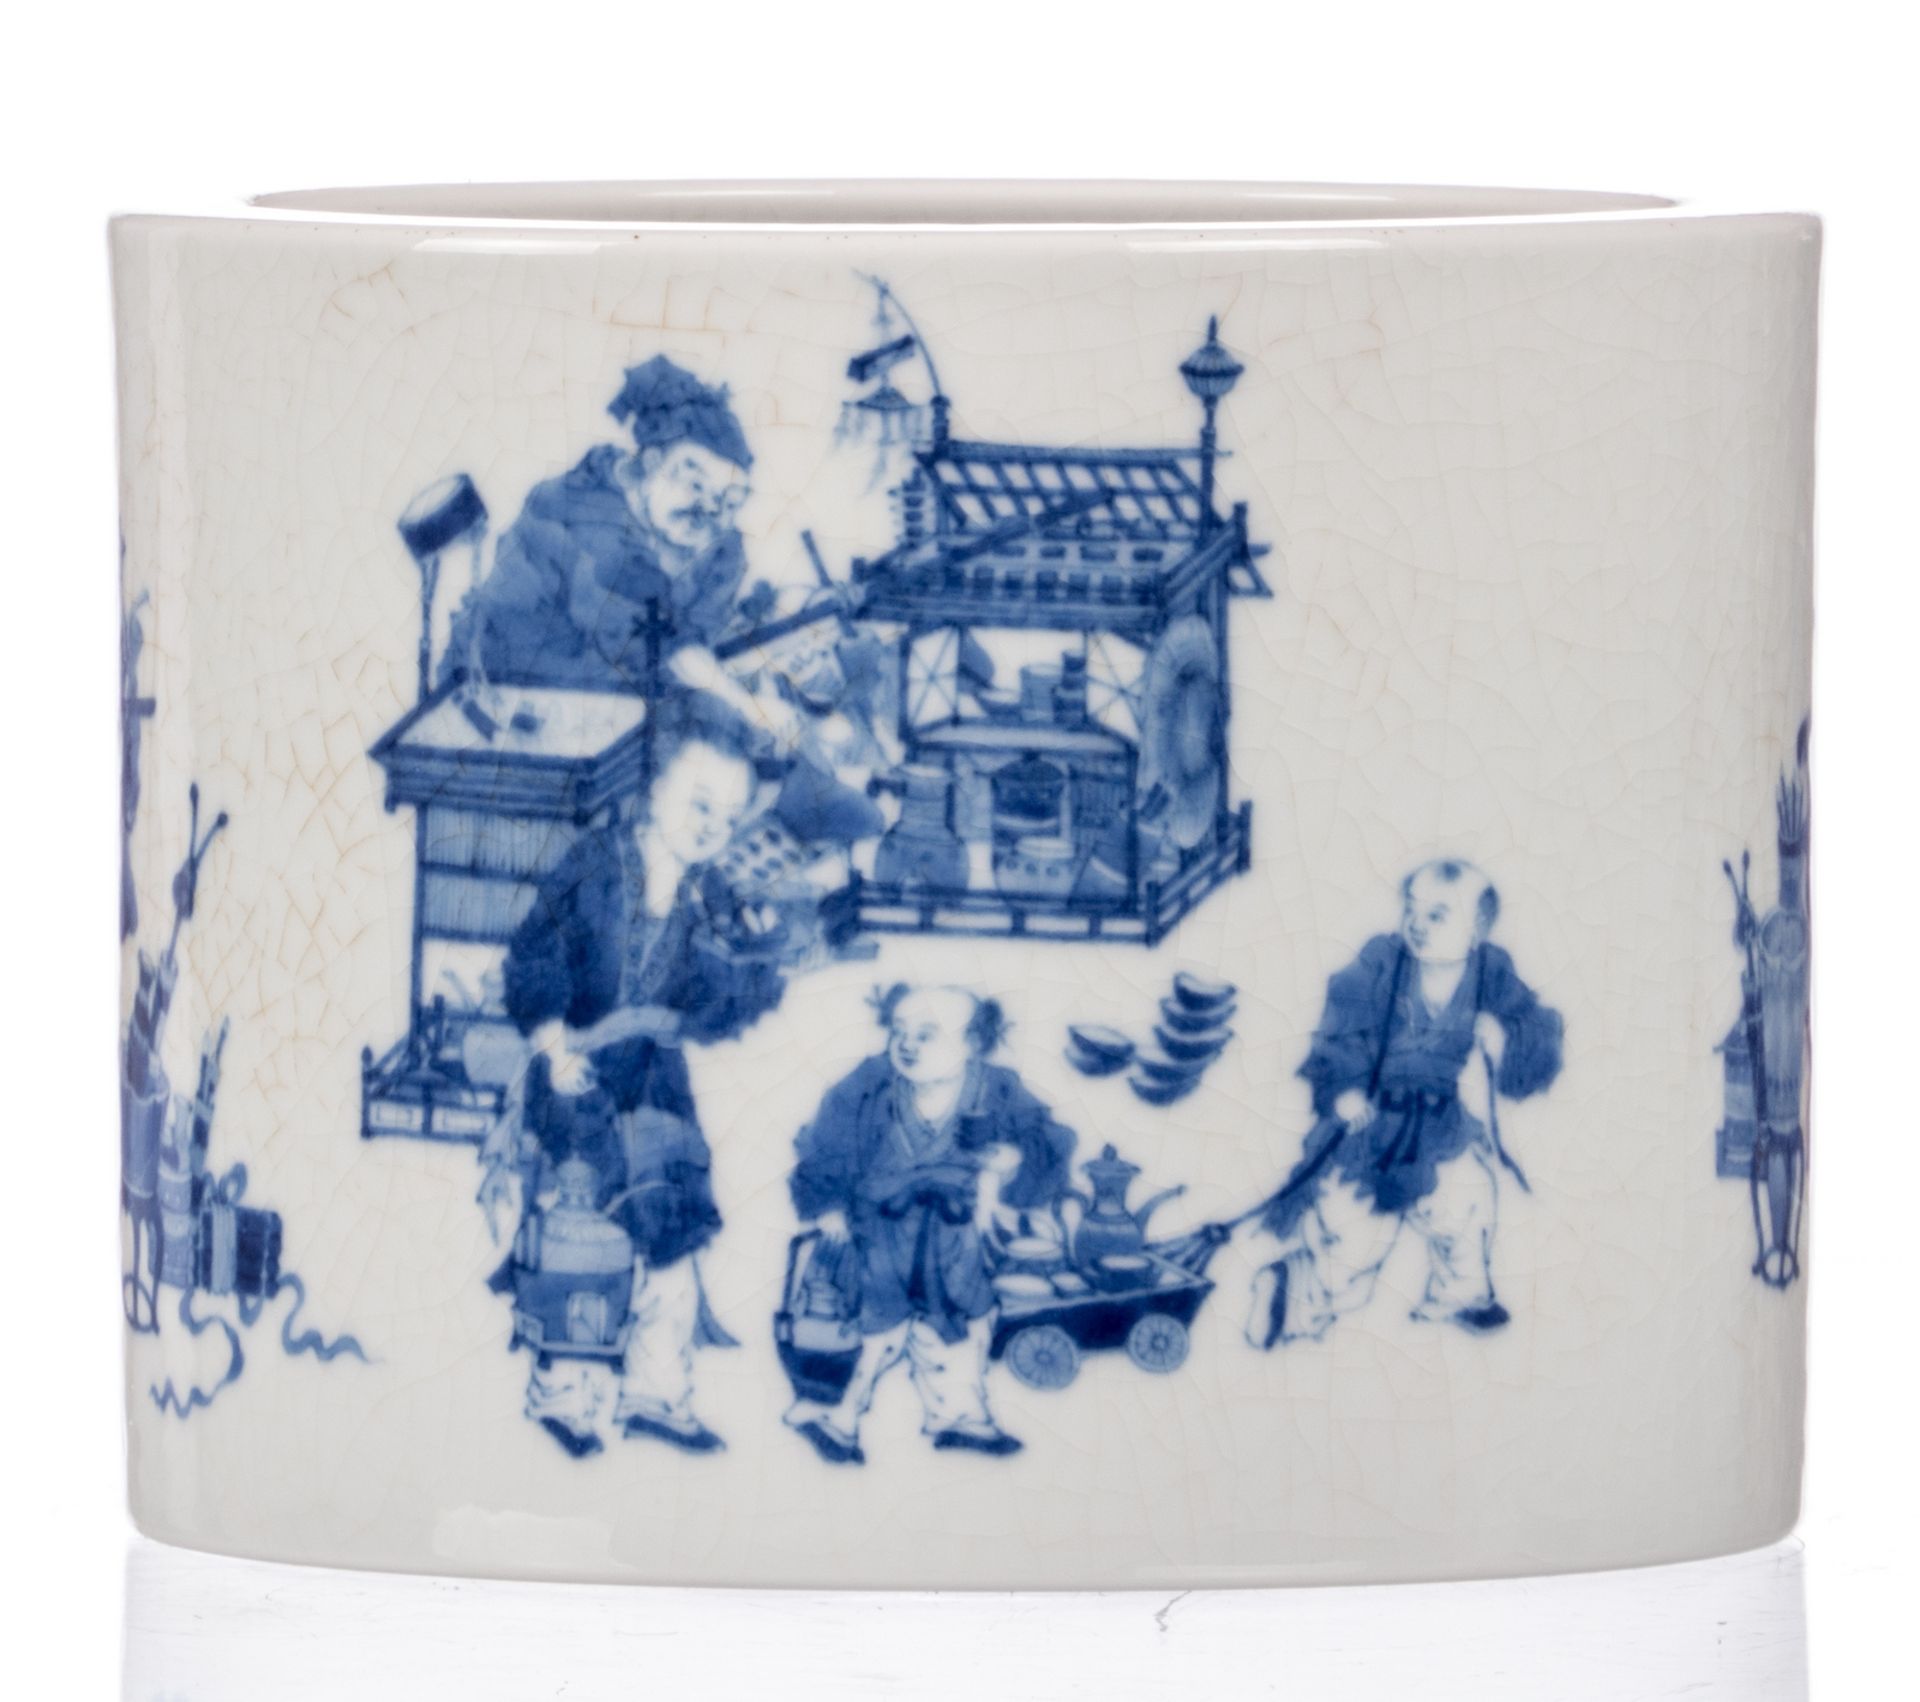 A Chinese blue and white brushpot, decorated with animated scenes, marked, 20thC, H 15 - Diameter 20 - Image 2 of 8